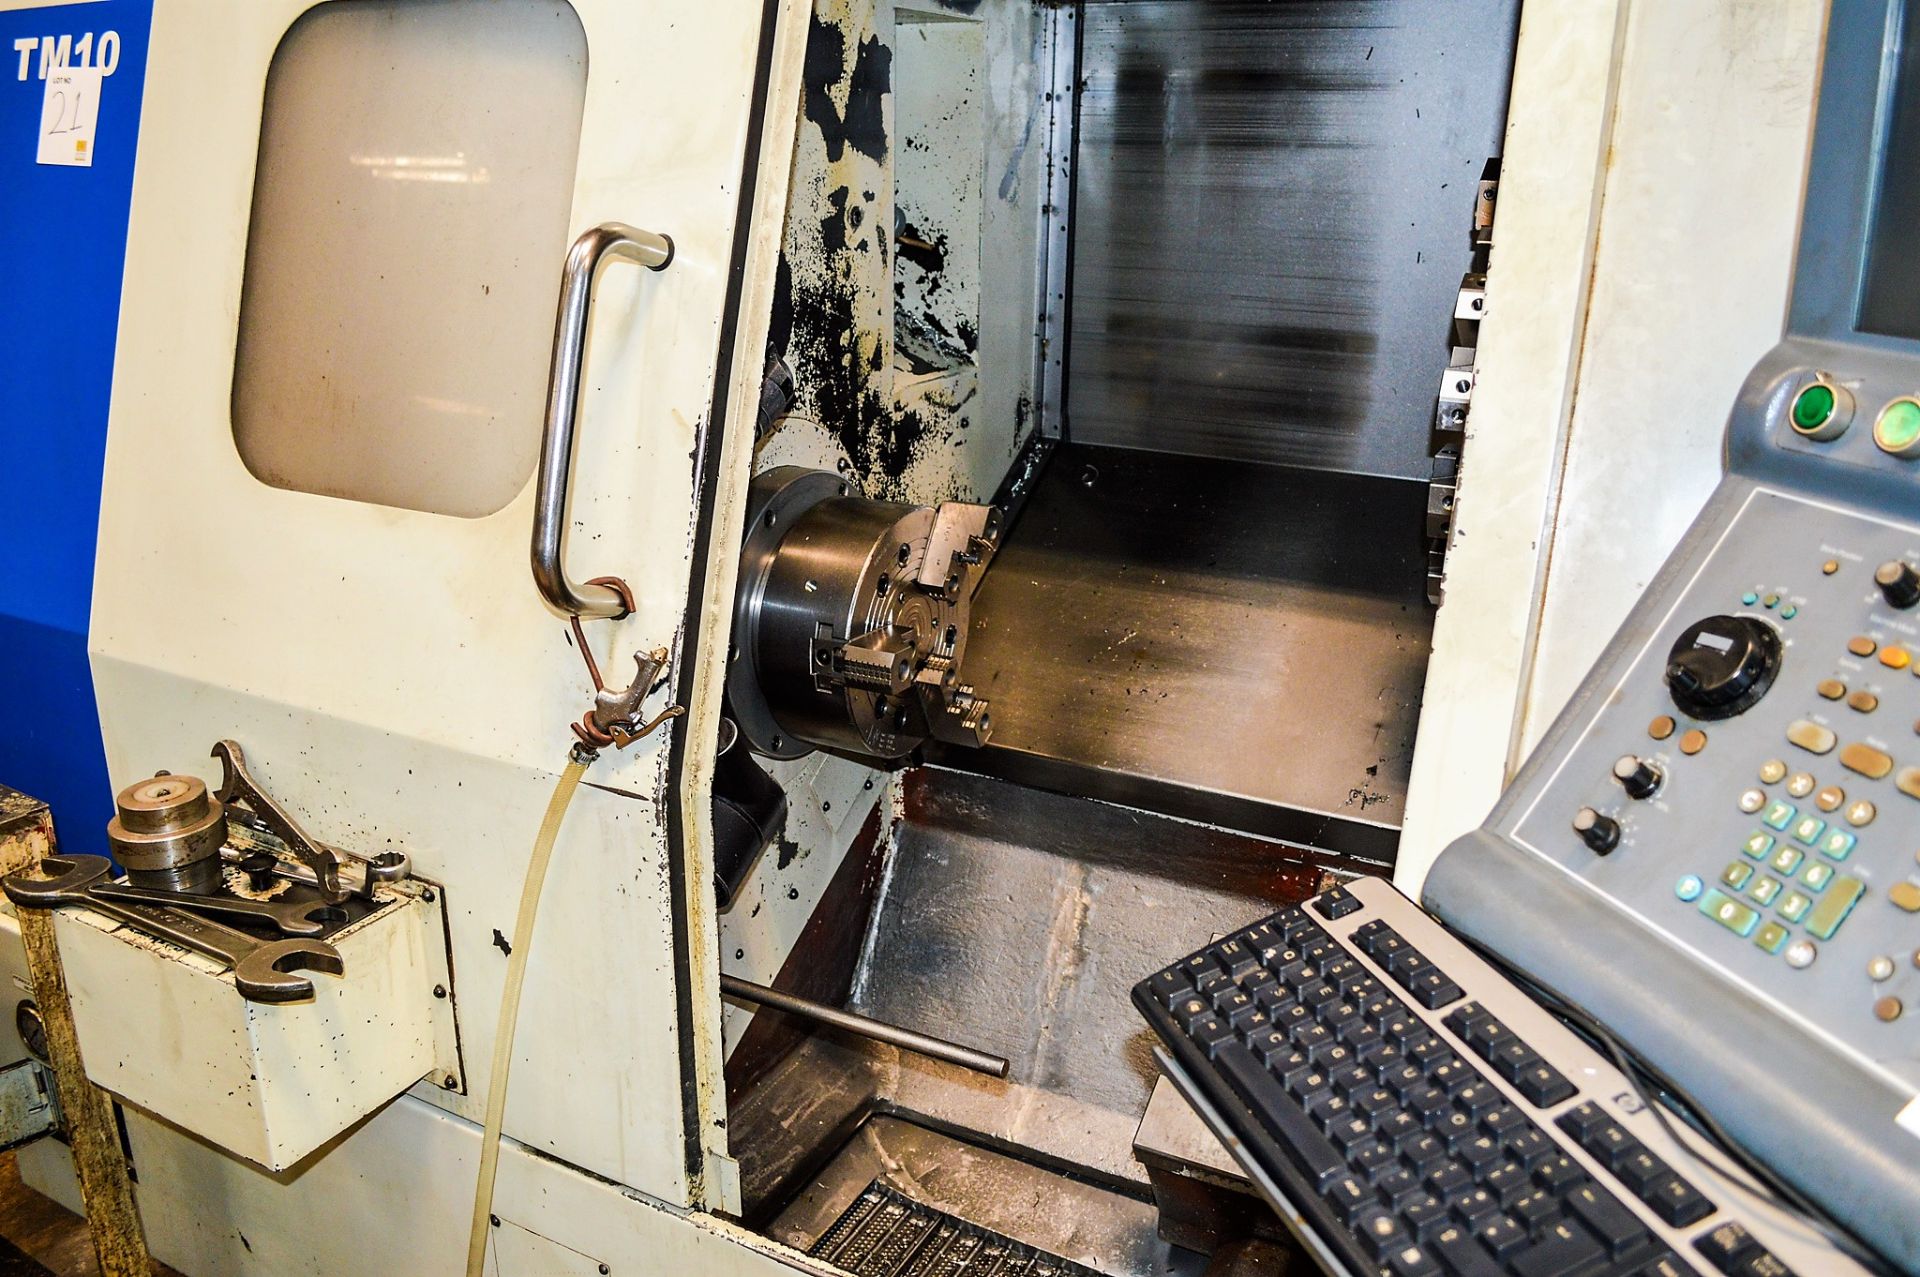 Hurco TMM10 CNC slant bed lathe S/N: 01103045AAA c/w 12 station tool store, headstock, Hurlo Max - Image 4 of 6